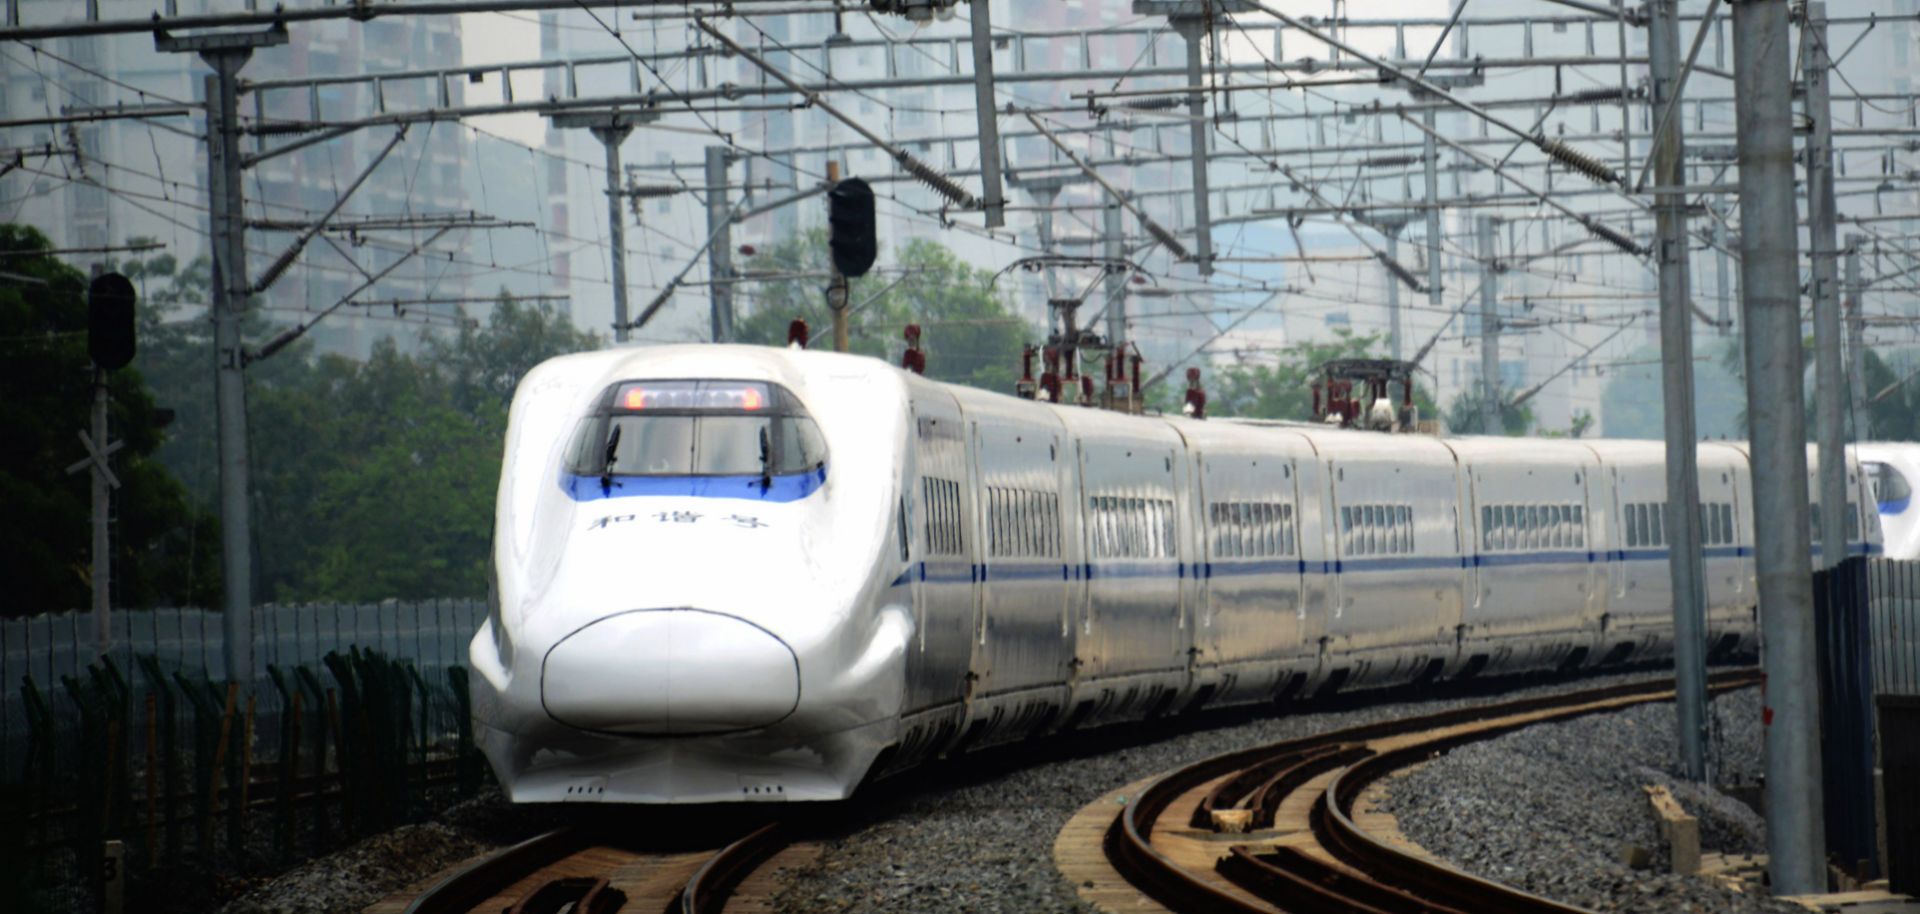 A high-speed train travels on the railway to Beijing in Nanning, southern China's Guangxi province on June 13, 2014.